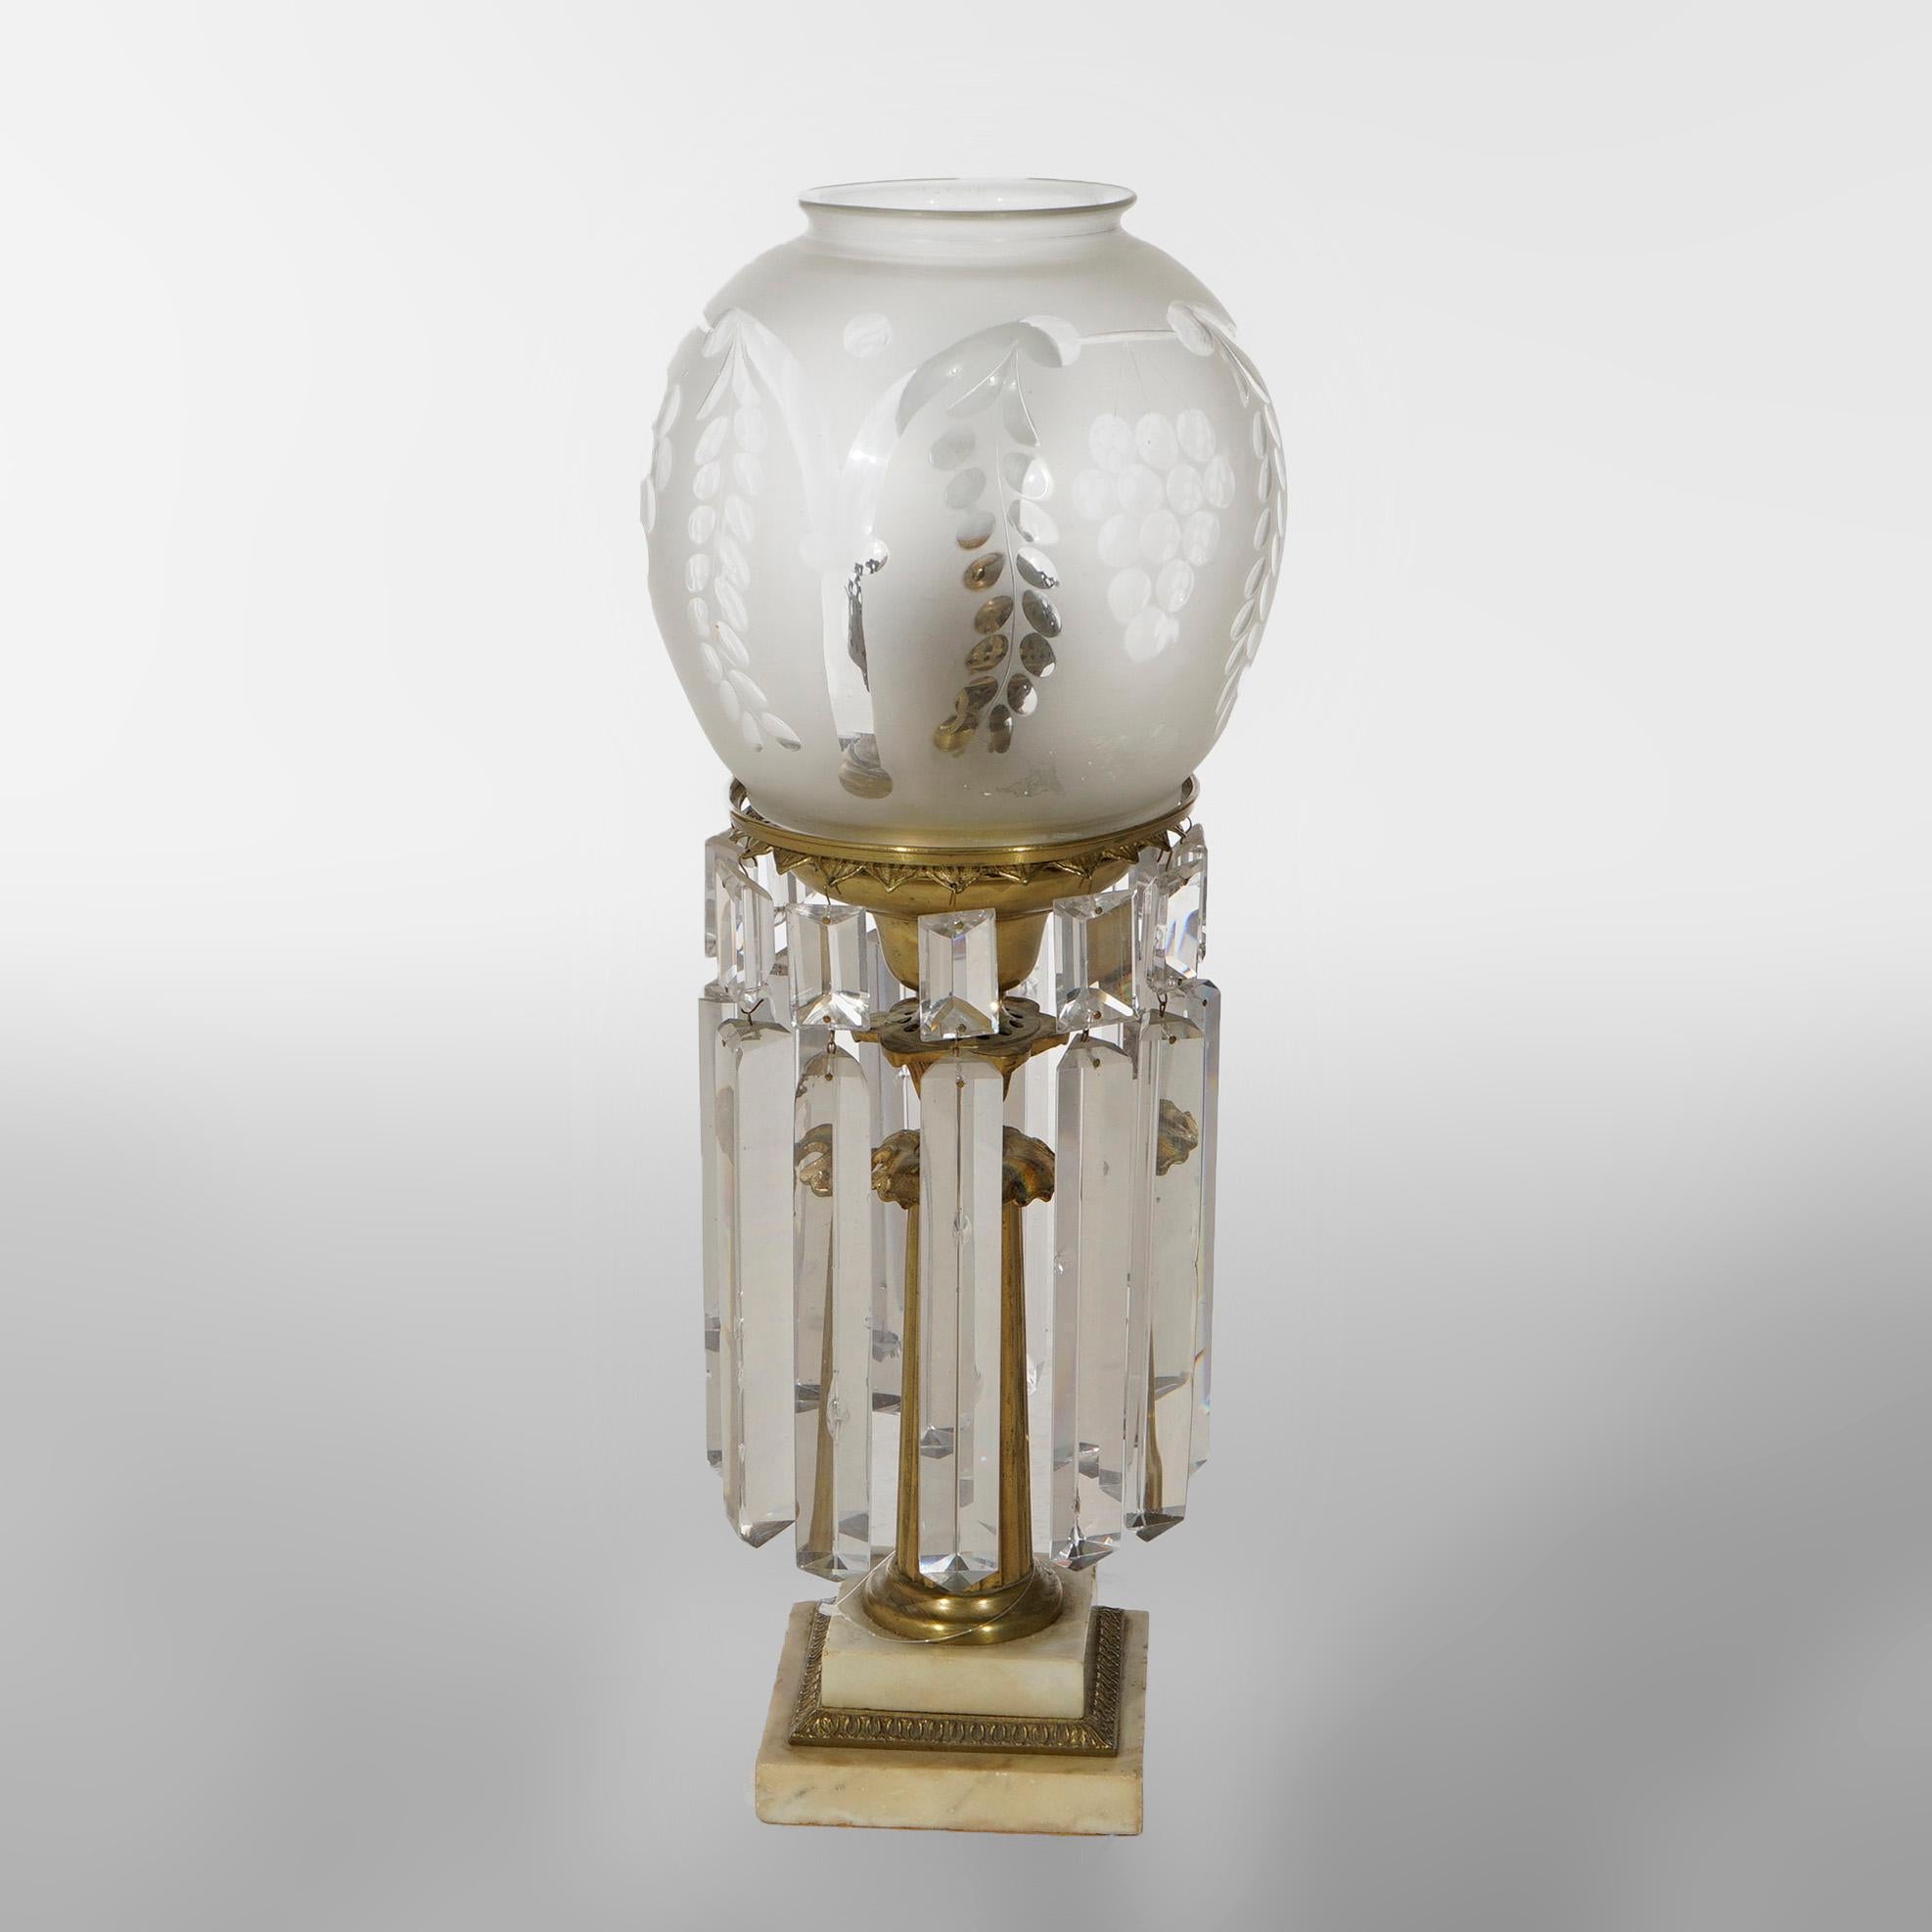 An antique Victorian solar Astral lamp in the manner of Cornelius offers frosted shade with grape motif over brass base having cut crystals, reeded column and marble foot, electrified, c1840

Measures- 21.25'' H x 8.5'' W x 8.5'' D.